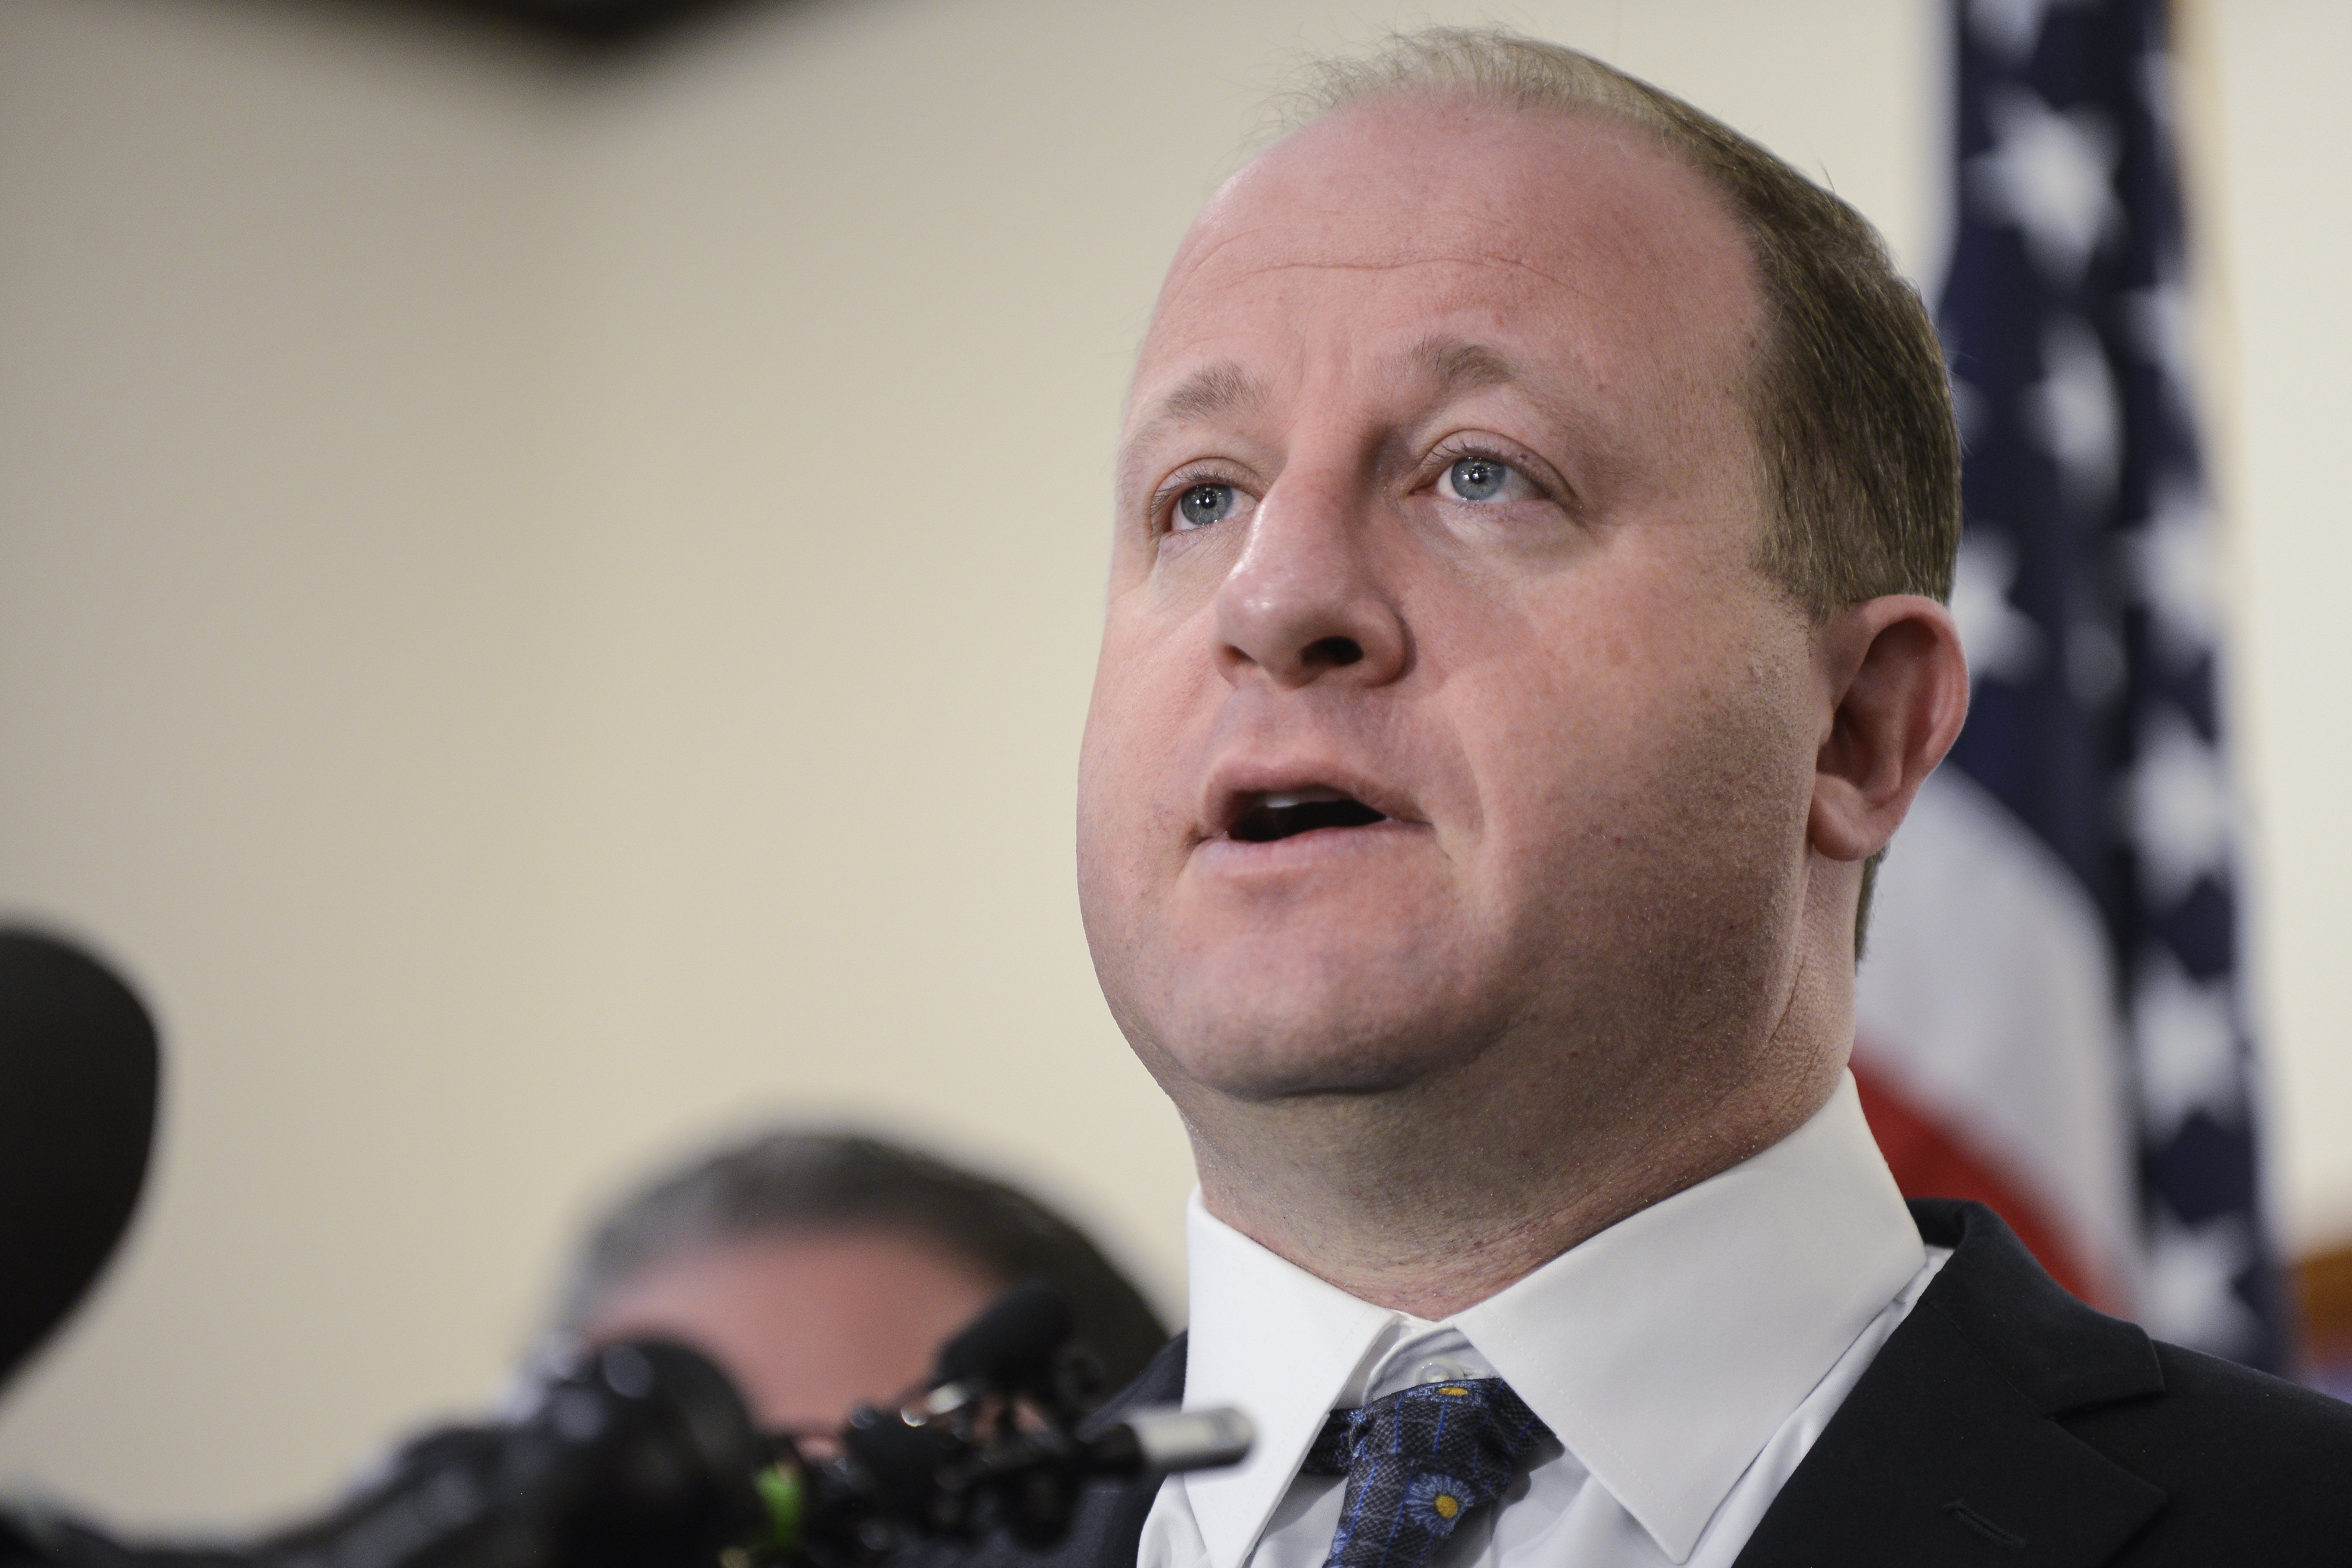 Colorado governor Jared Polis speaking to the media at Douglas County Sheriffs Office Highlands Ranch Substation | Photo: Getty Images